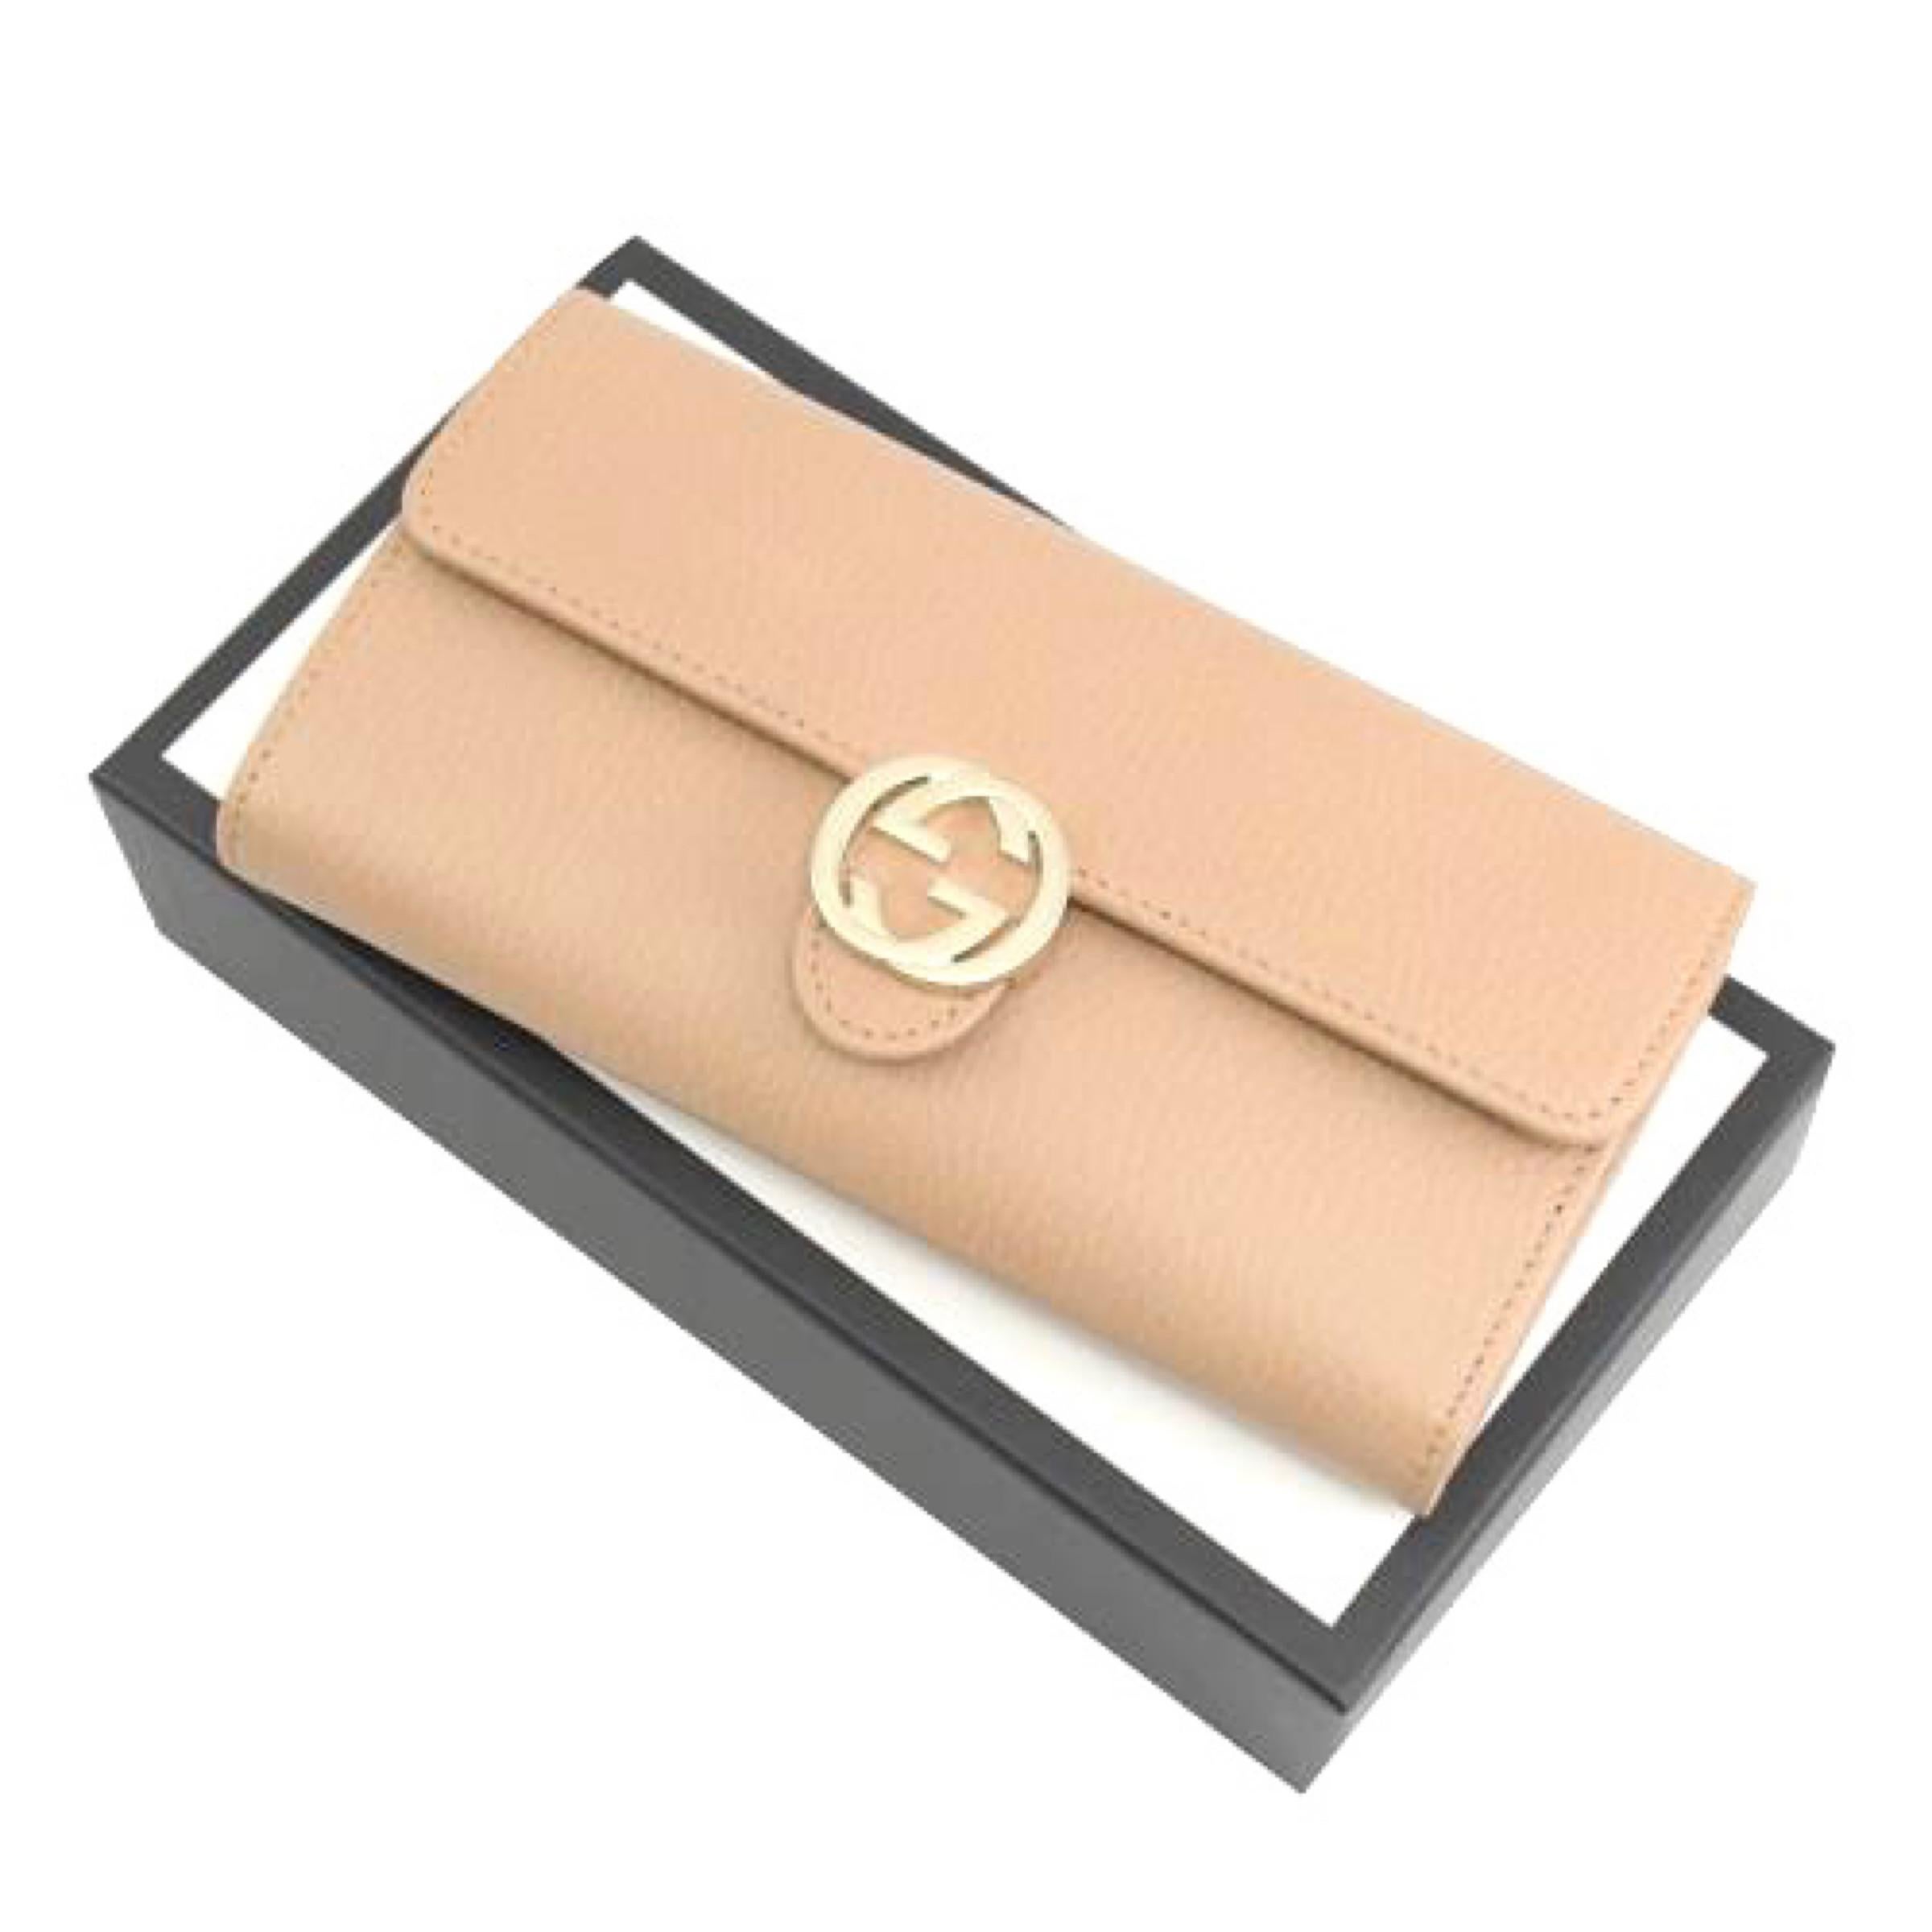 NEW Gucci Beige Interlocking G Leather Long Wallet Clutch Bag For Sale 8